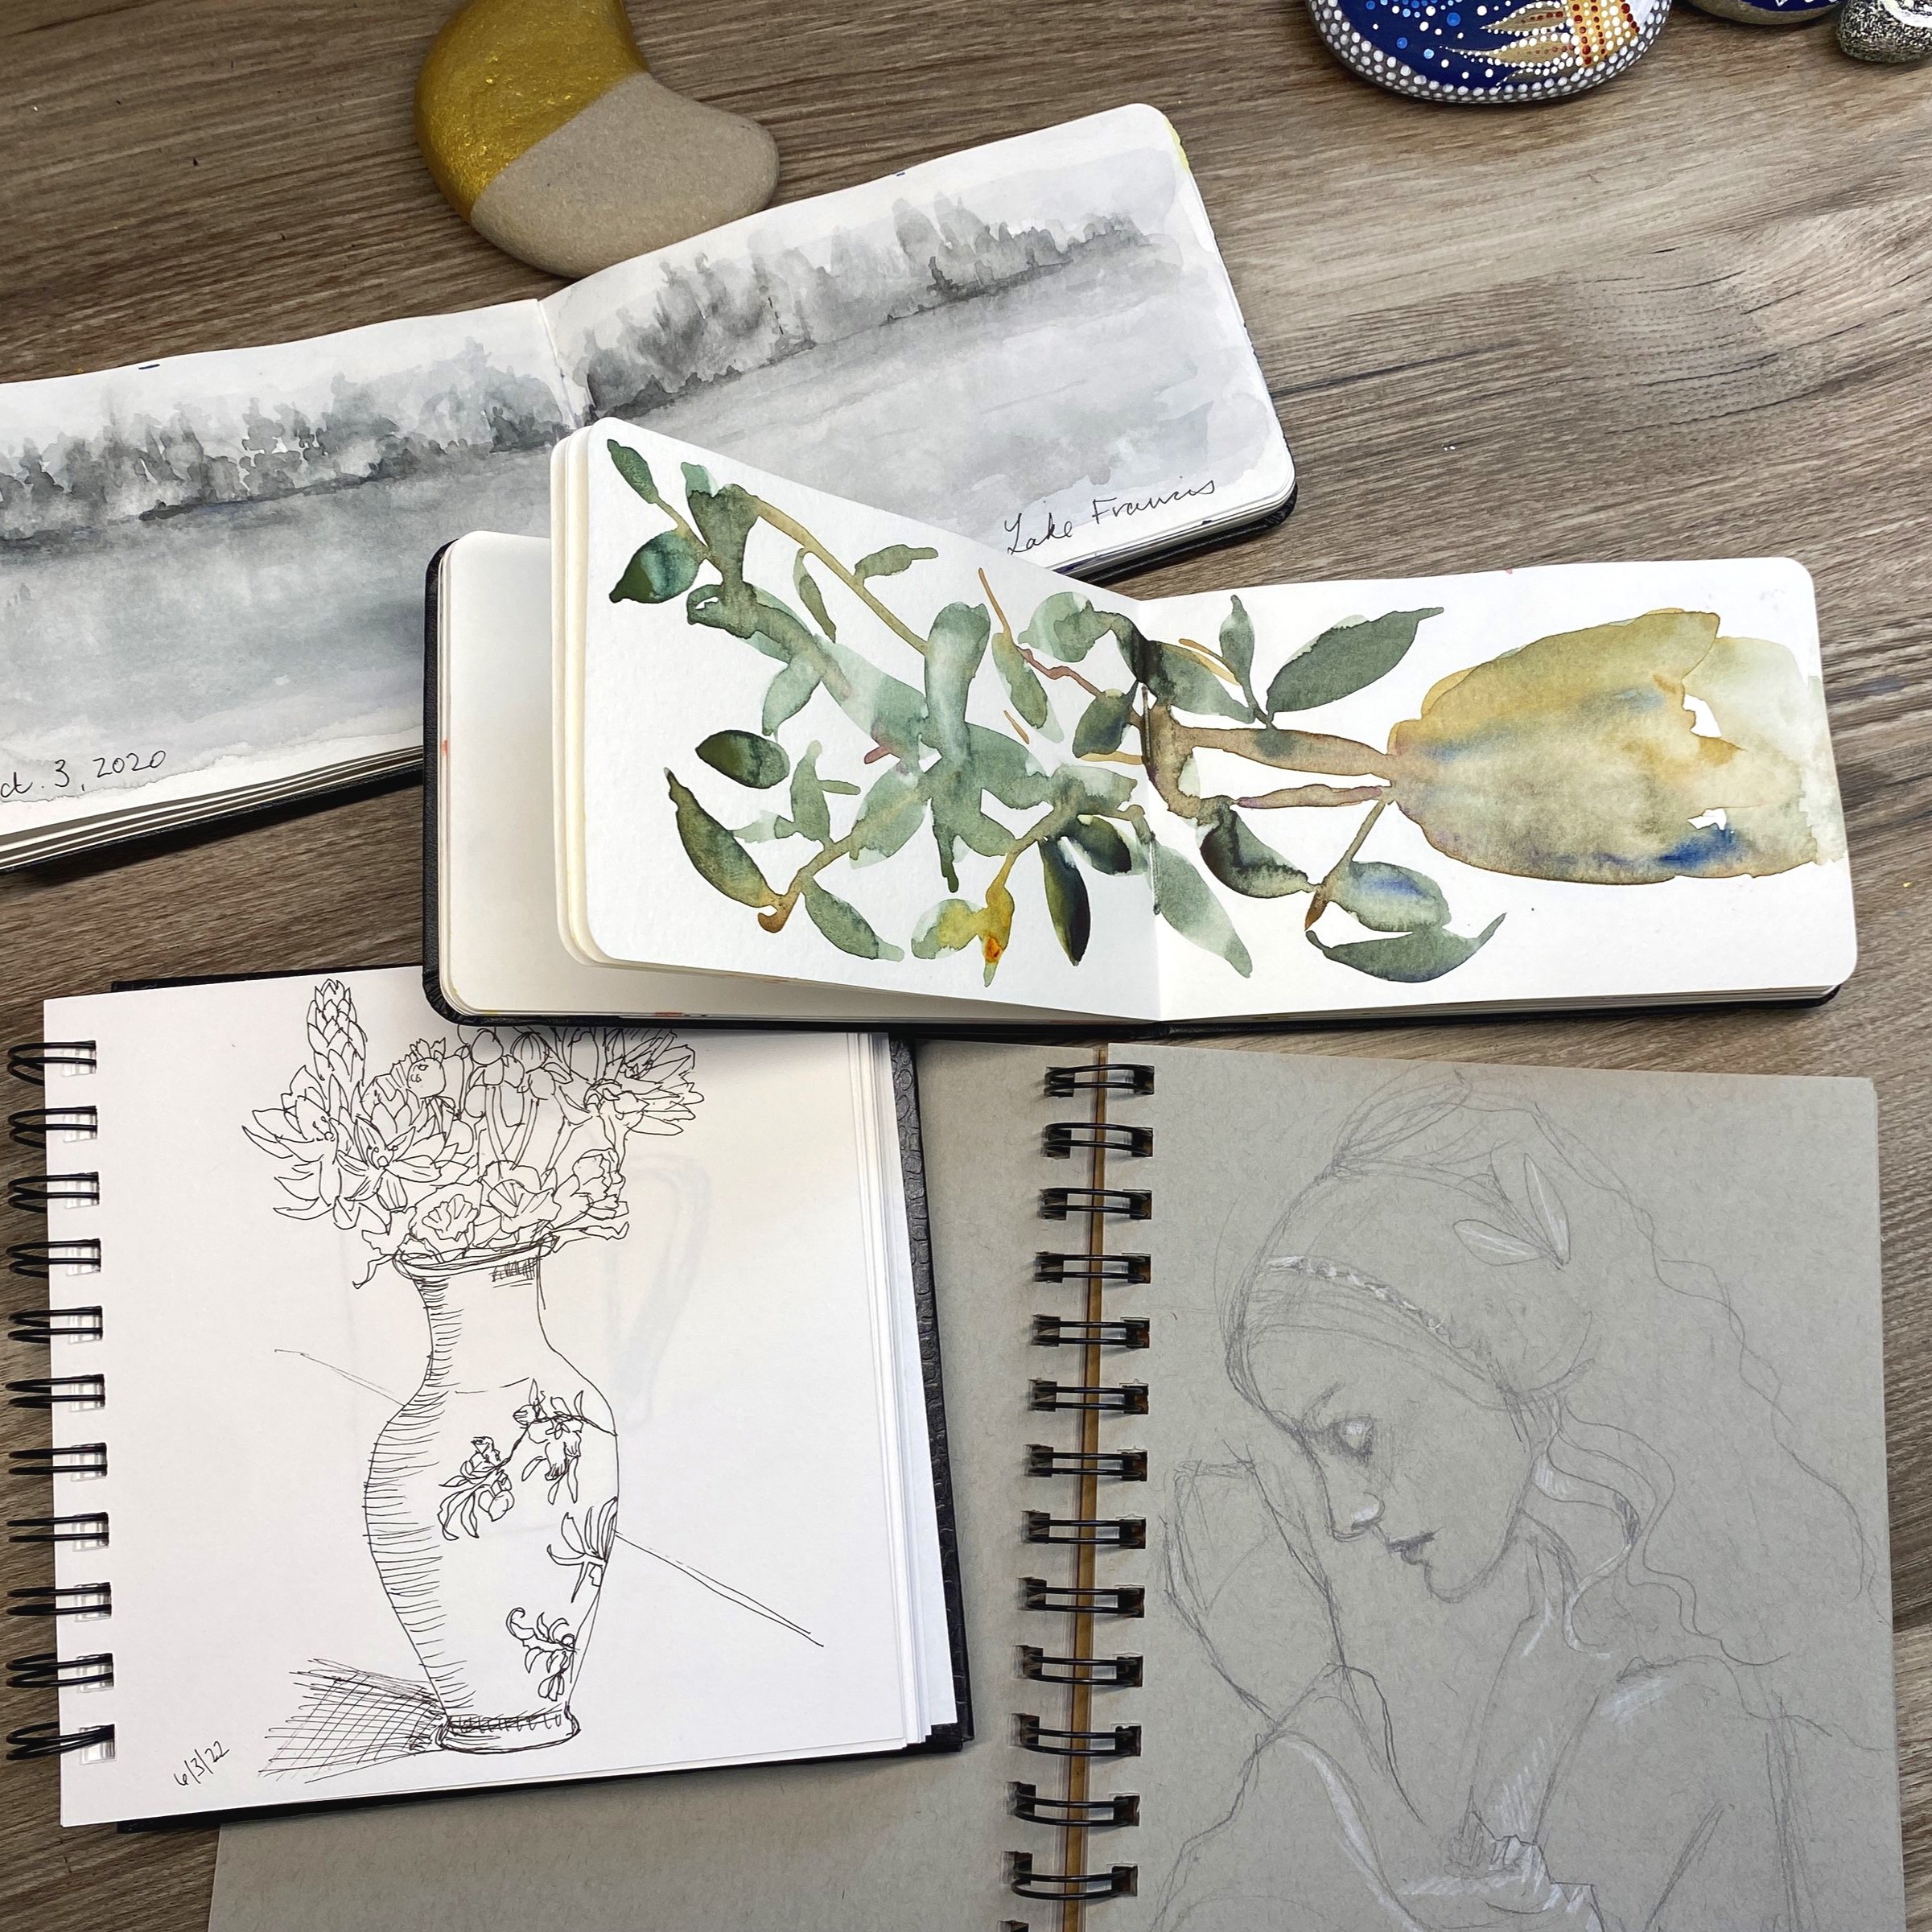 Favorite Sketching Techniques, Materials and Sketchbooks from 11 Artists